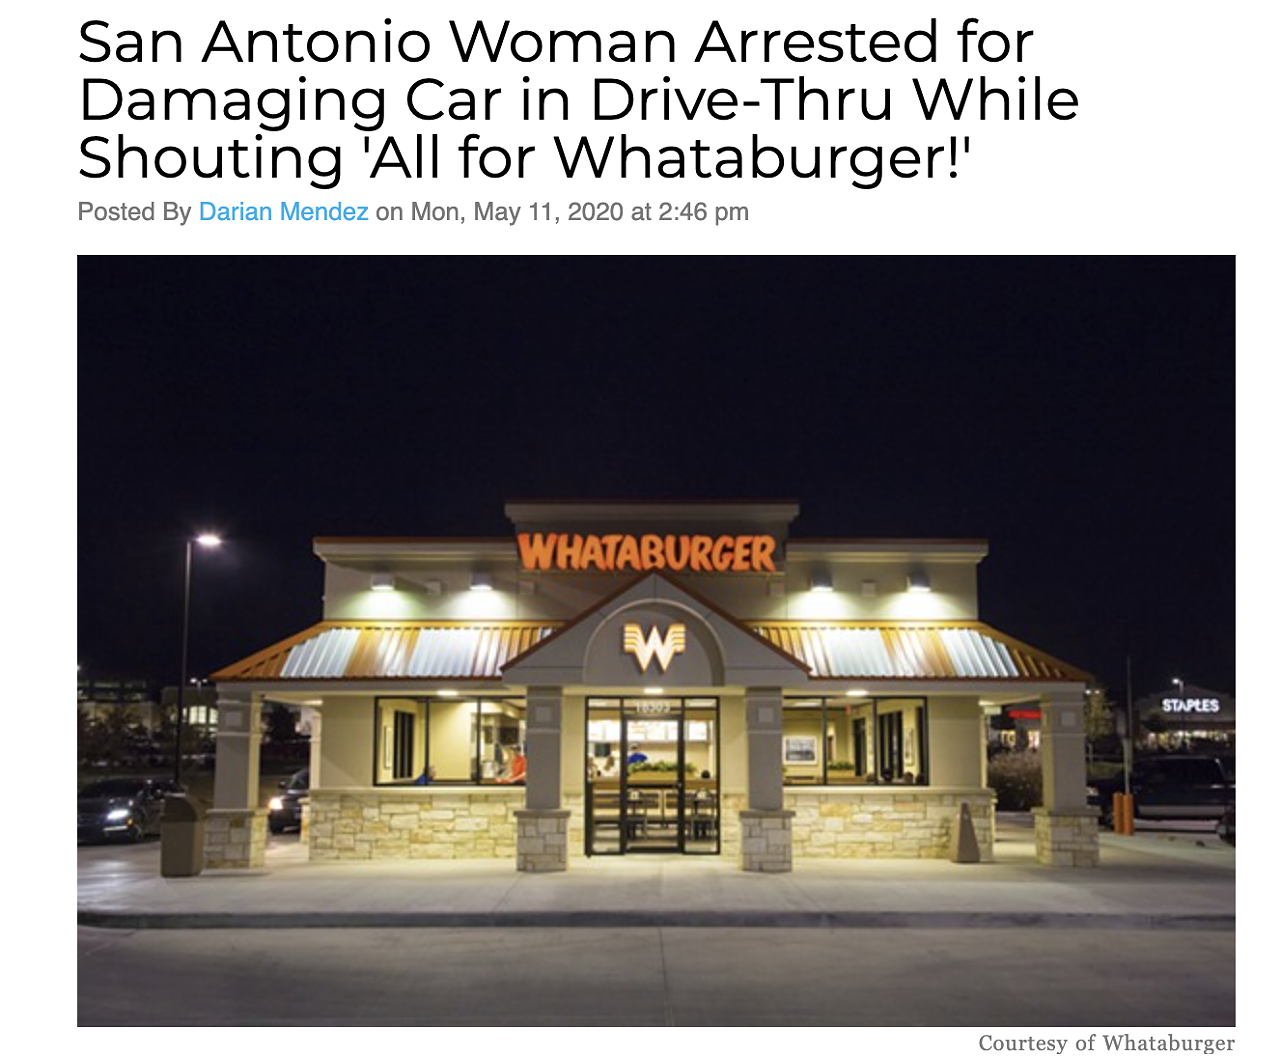 A hangry woman is facing charges after losing her temper and damaging another vehicle waiting in line at a San Antonio Whataburger drive-thru. Read more here.